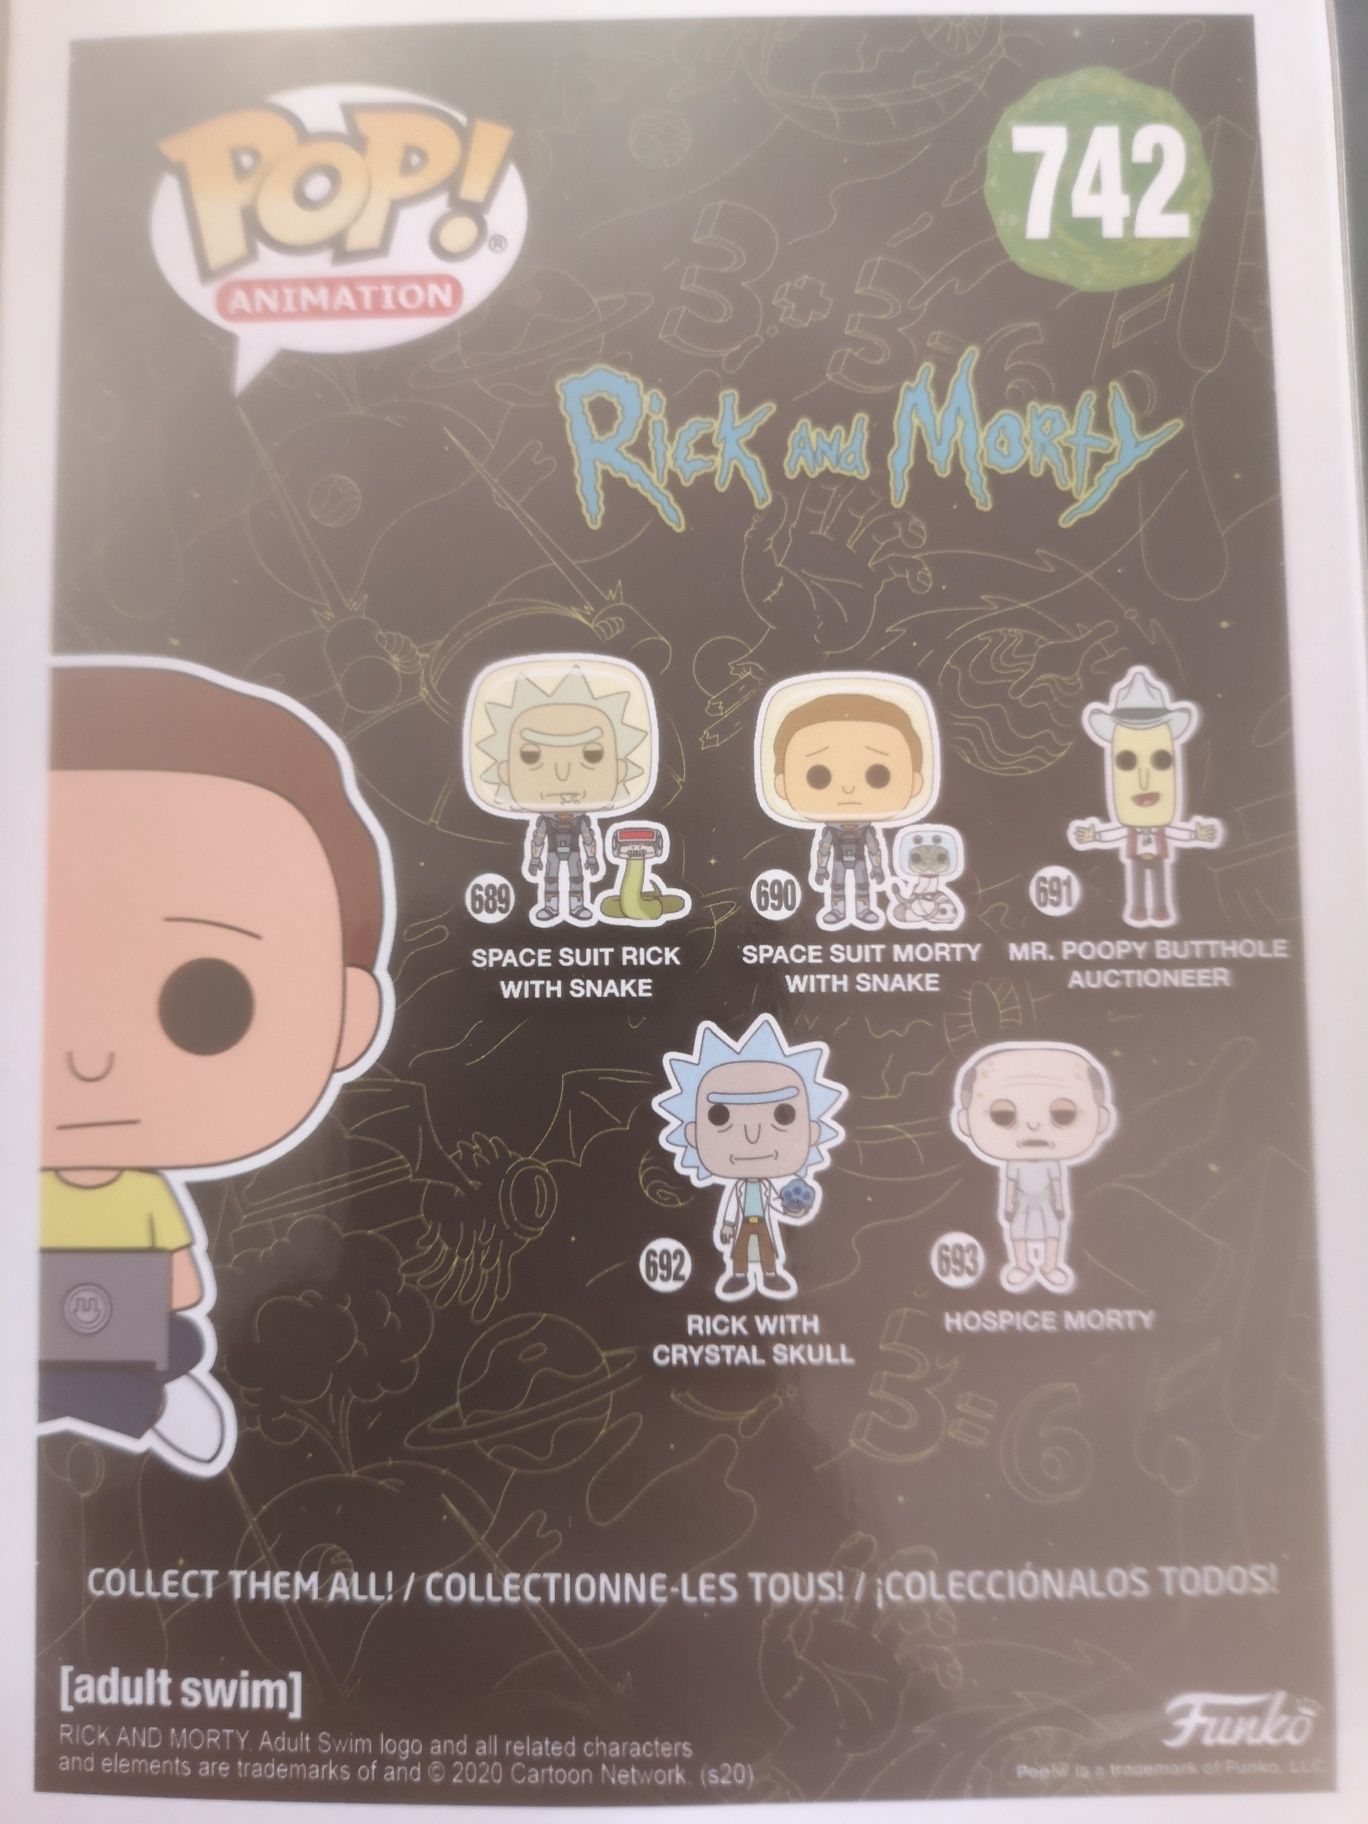 Exclusivo Funko Pop Rick and Morty - Morty with Laptop